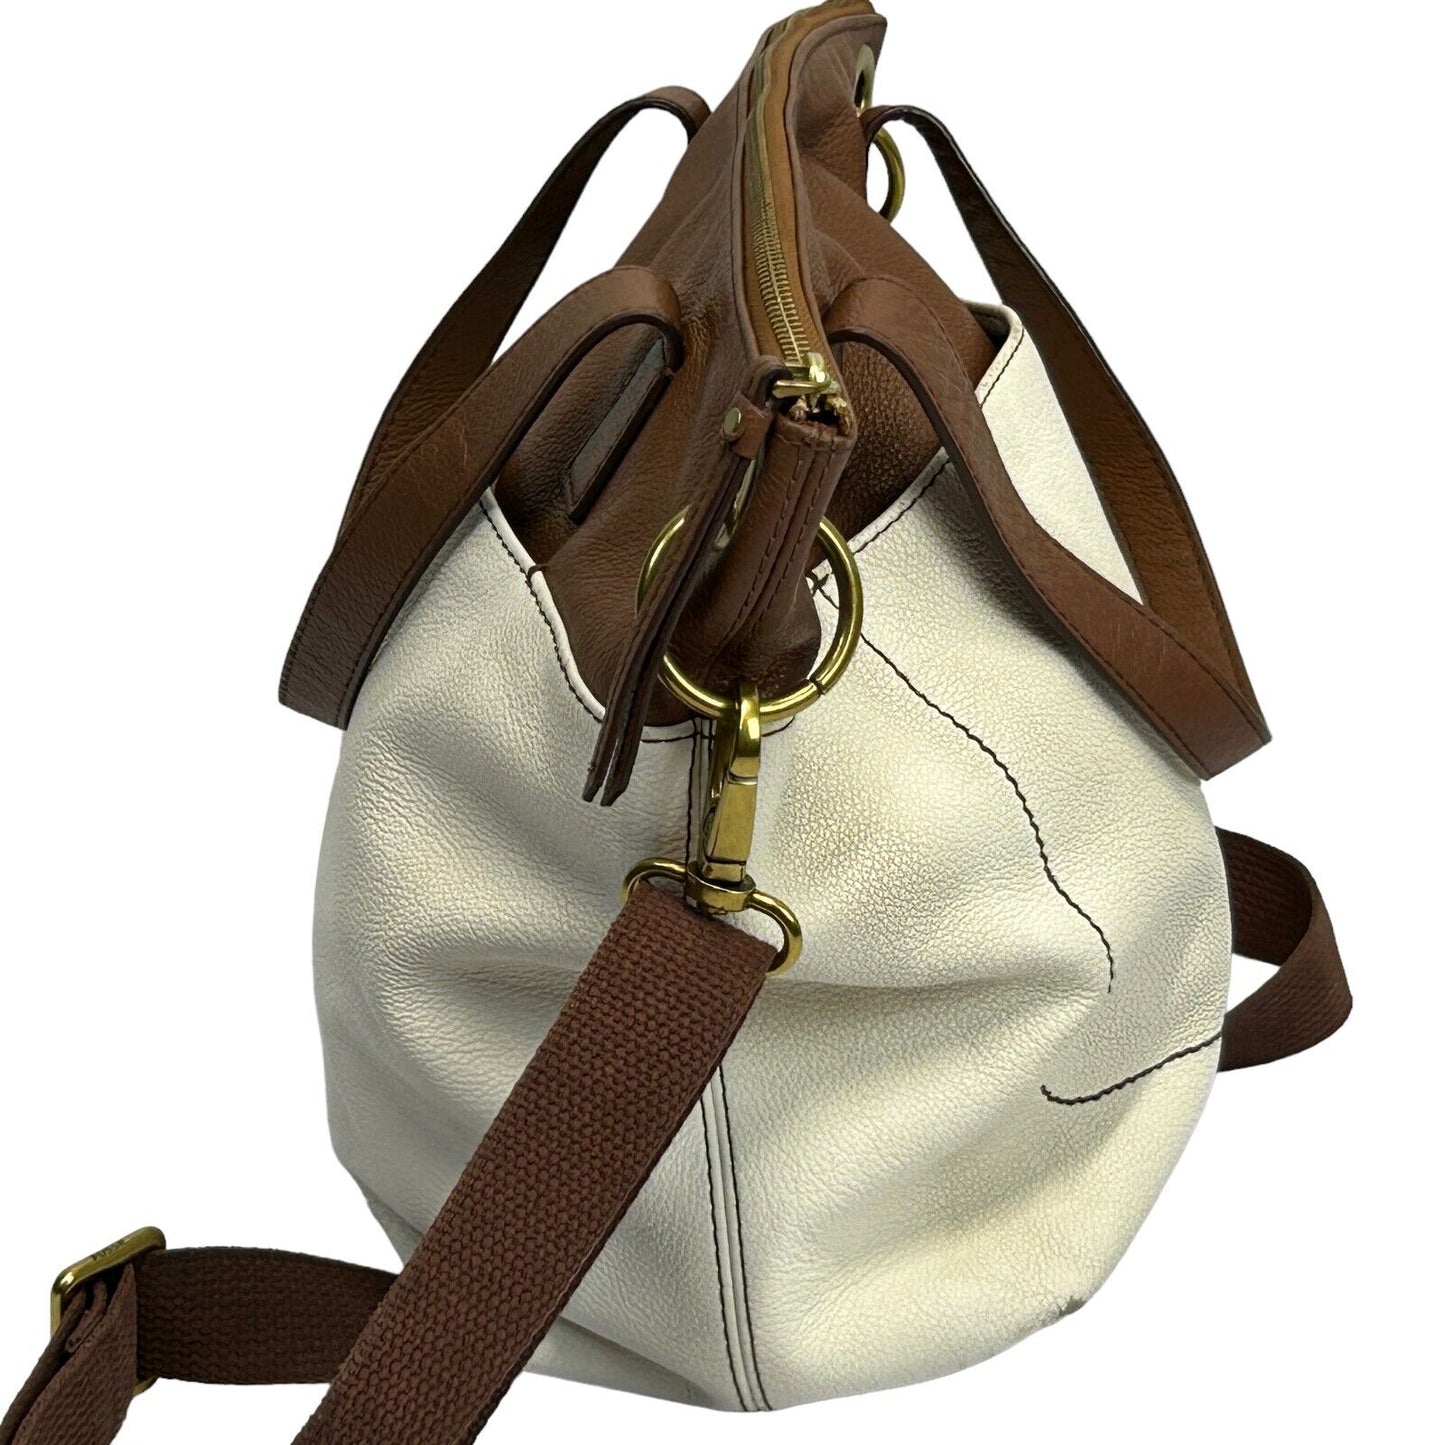 Fossil Keely Womens Large Pebbled Leather Crossbody Tote Handbag Bone White Brown